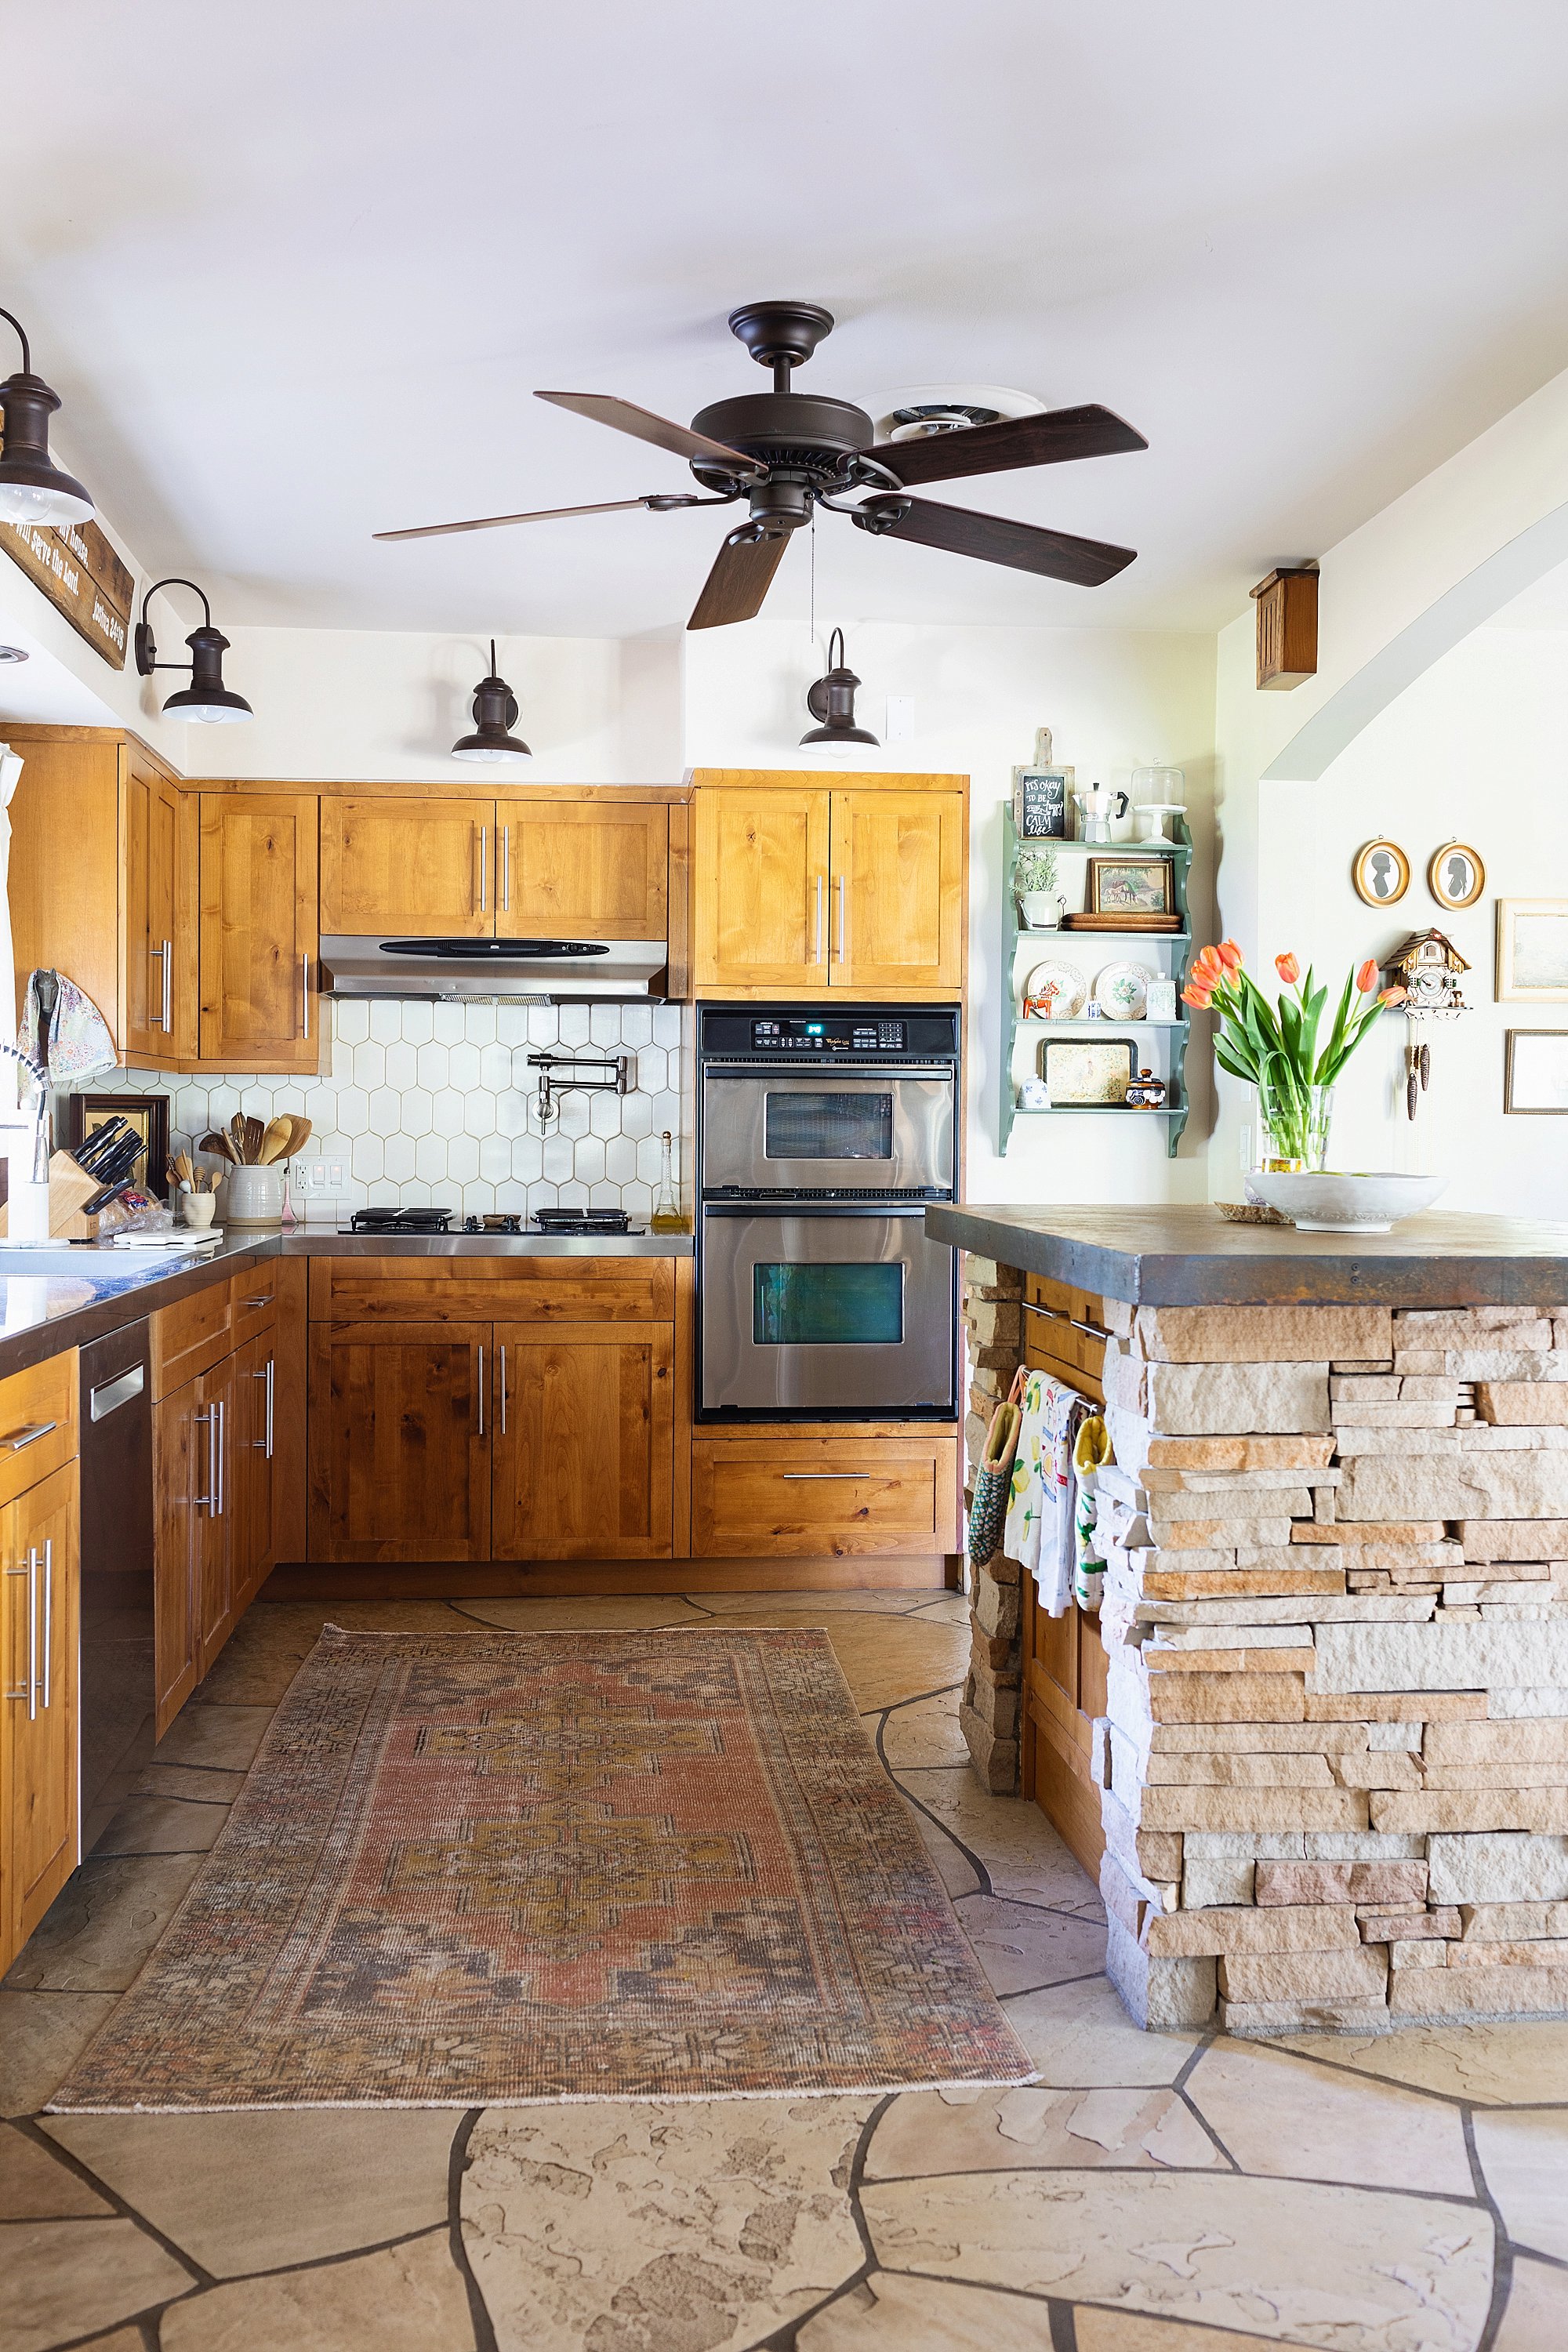 Kitchen style white walker Zanger 6yth avenue cocoon tile in Phoenix lifestyle blogger Diana Elizabeth's home. Cottage rustic style kitchen with flagstone an cement island